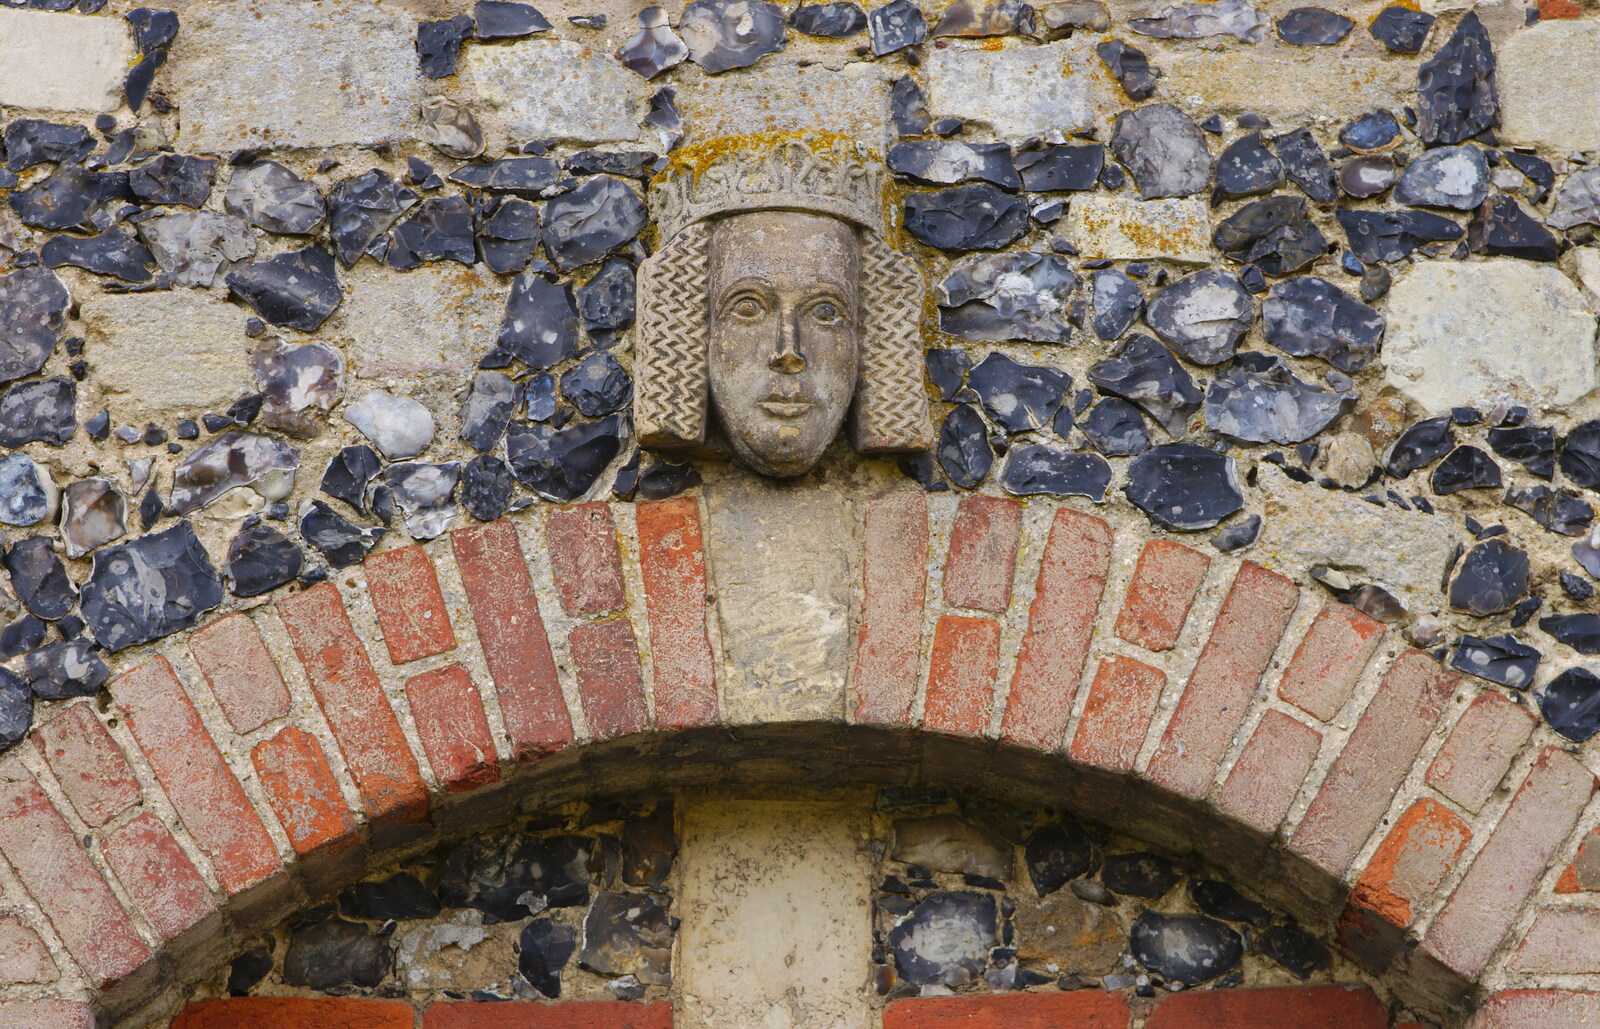 Another head on a wall from A Trip to Framlingham Castle, Framlingham, Suffolk - 16th February 2014